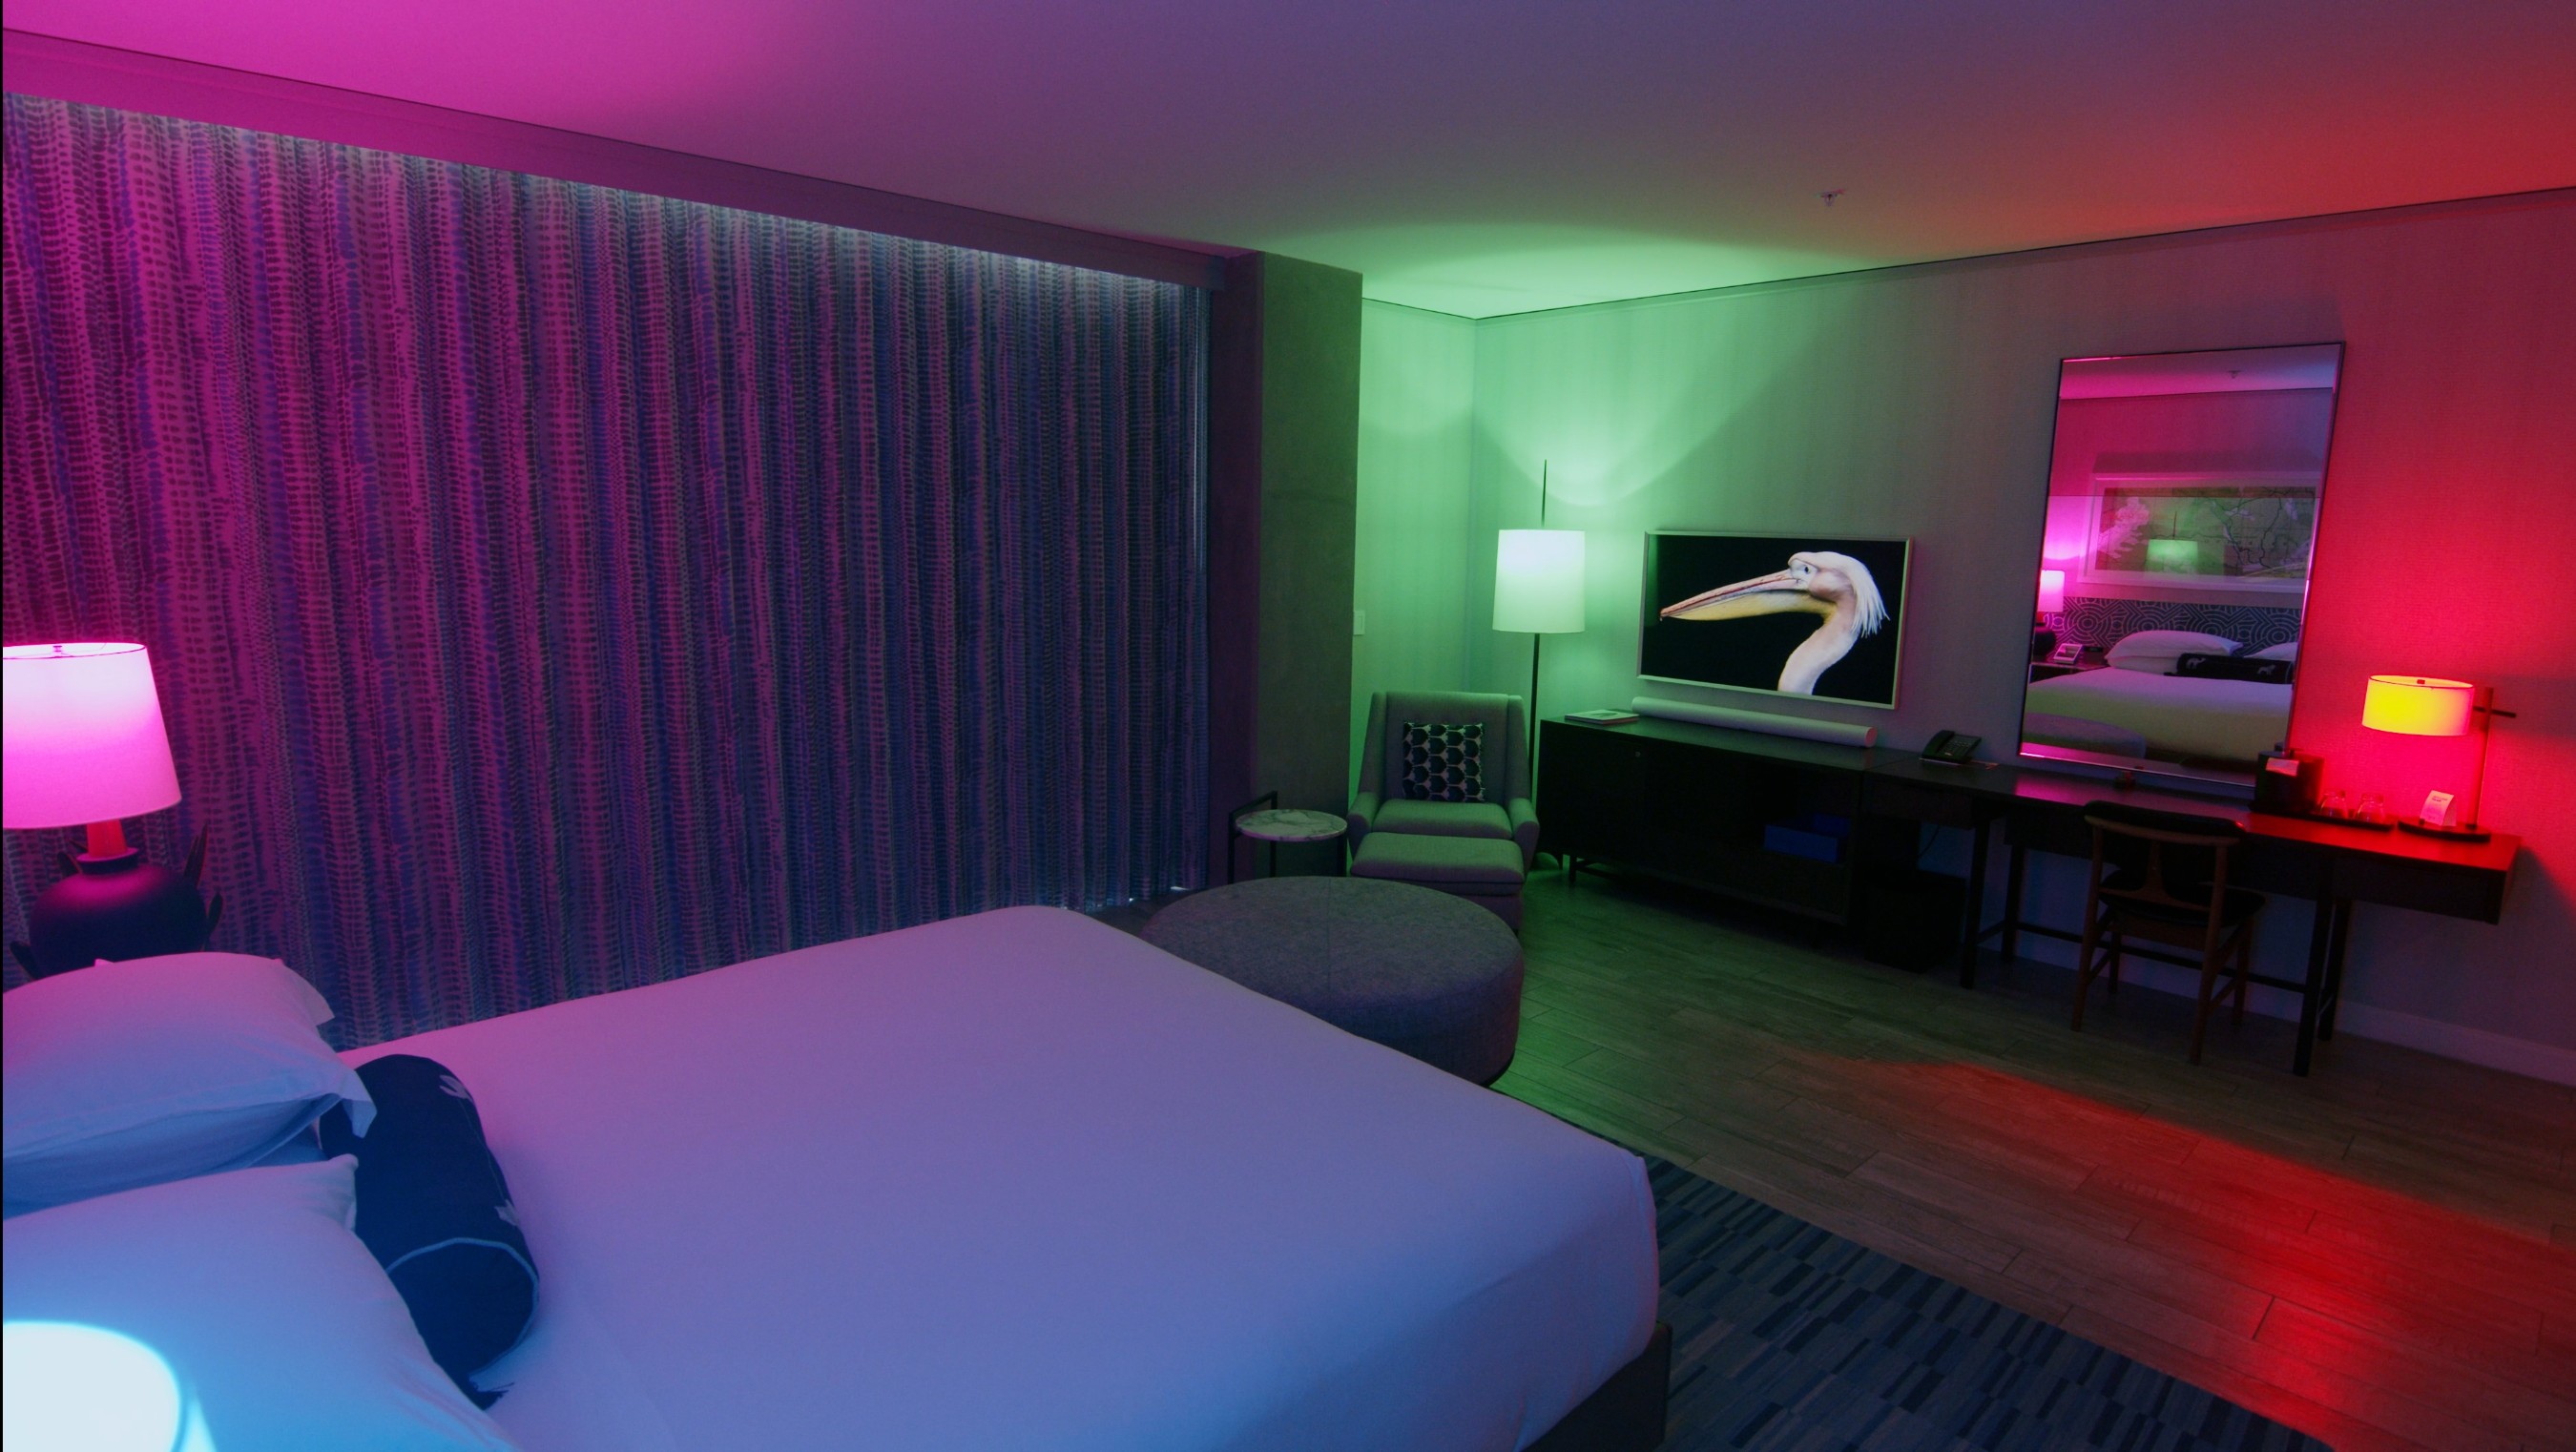 Ketra Lighting by Lutron allows IHG guests to set the perfect mood by adjusting color temperature